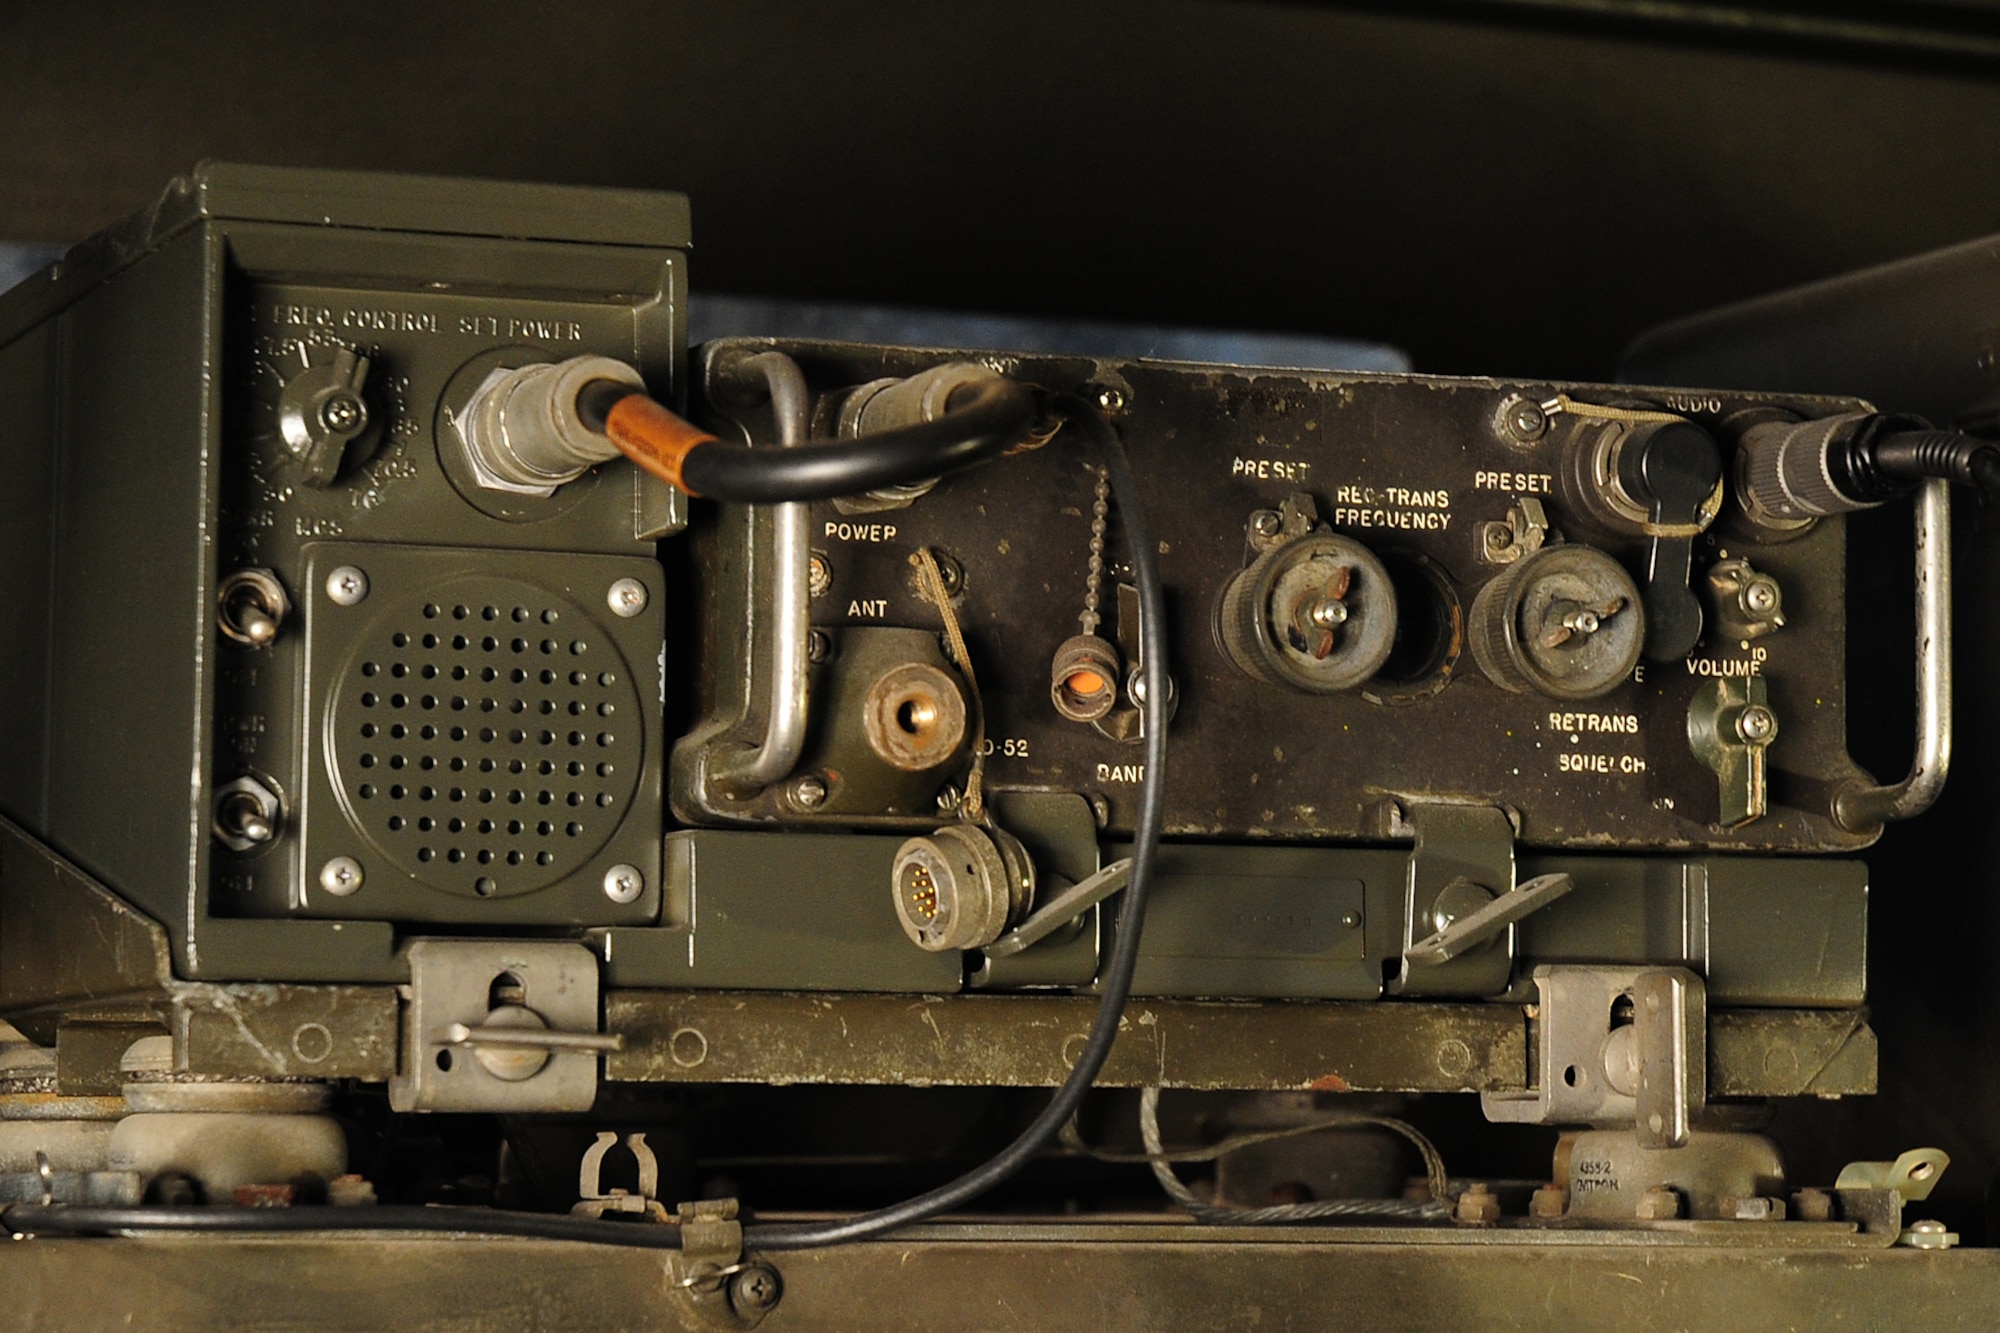 DAYTON, Ohio -- Interior of the AN/MRC-108 Communication System on display in the Southeast Asia War Gallery at the National Museum of the U.S. Air Force. (U.S. Air Force photo)